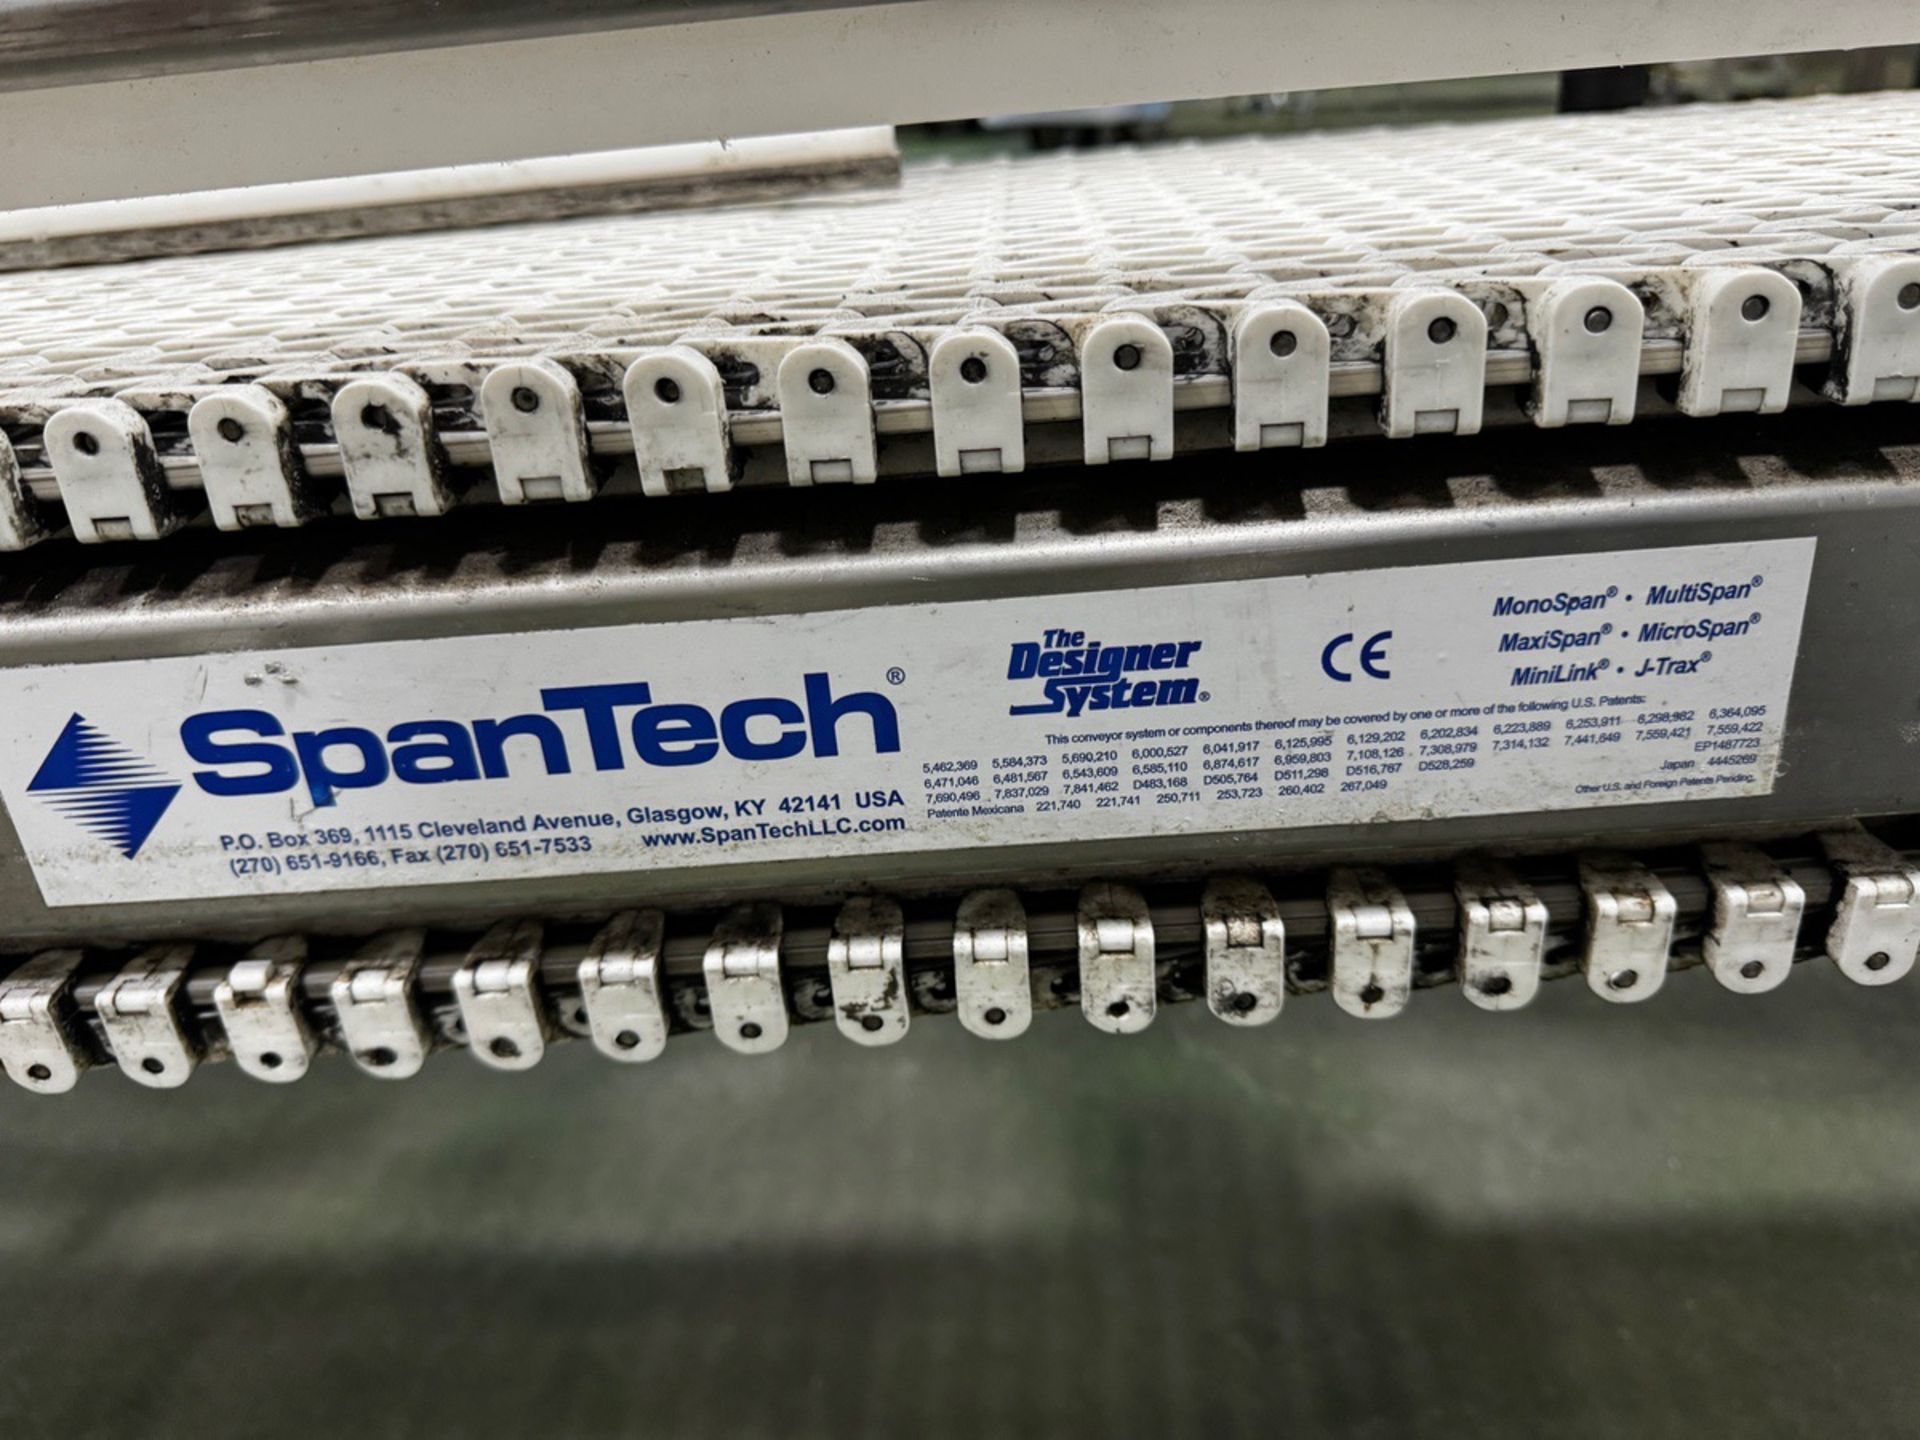 SpanTech Stainless Steel Frame Case Conveyor, 16" W x 18' L | Rig Fee $200 - Image 3 of 3